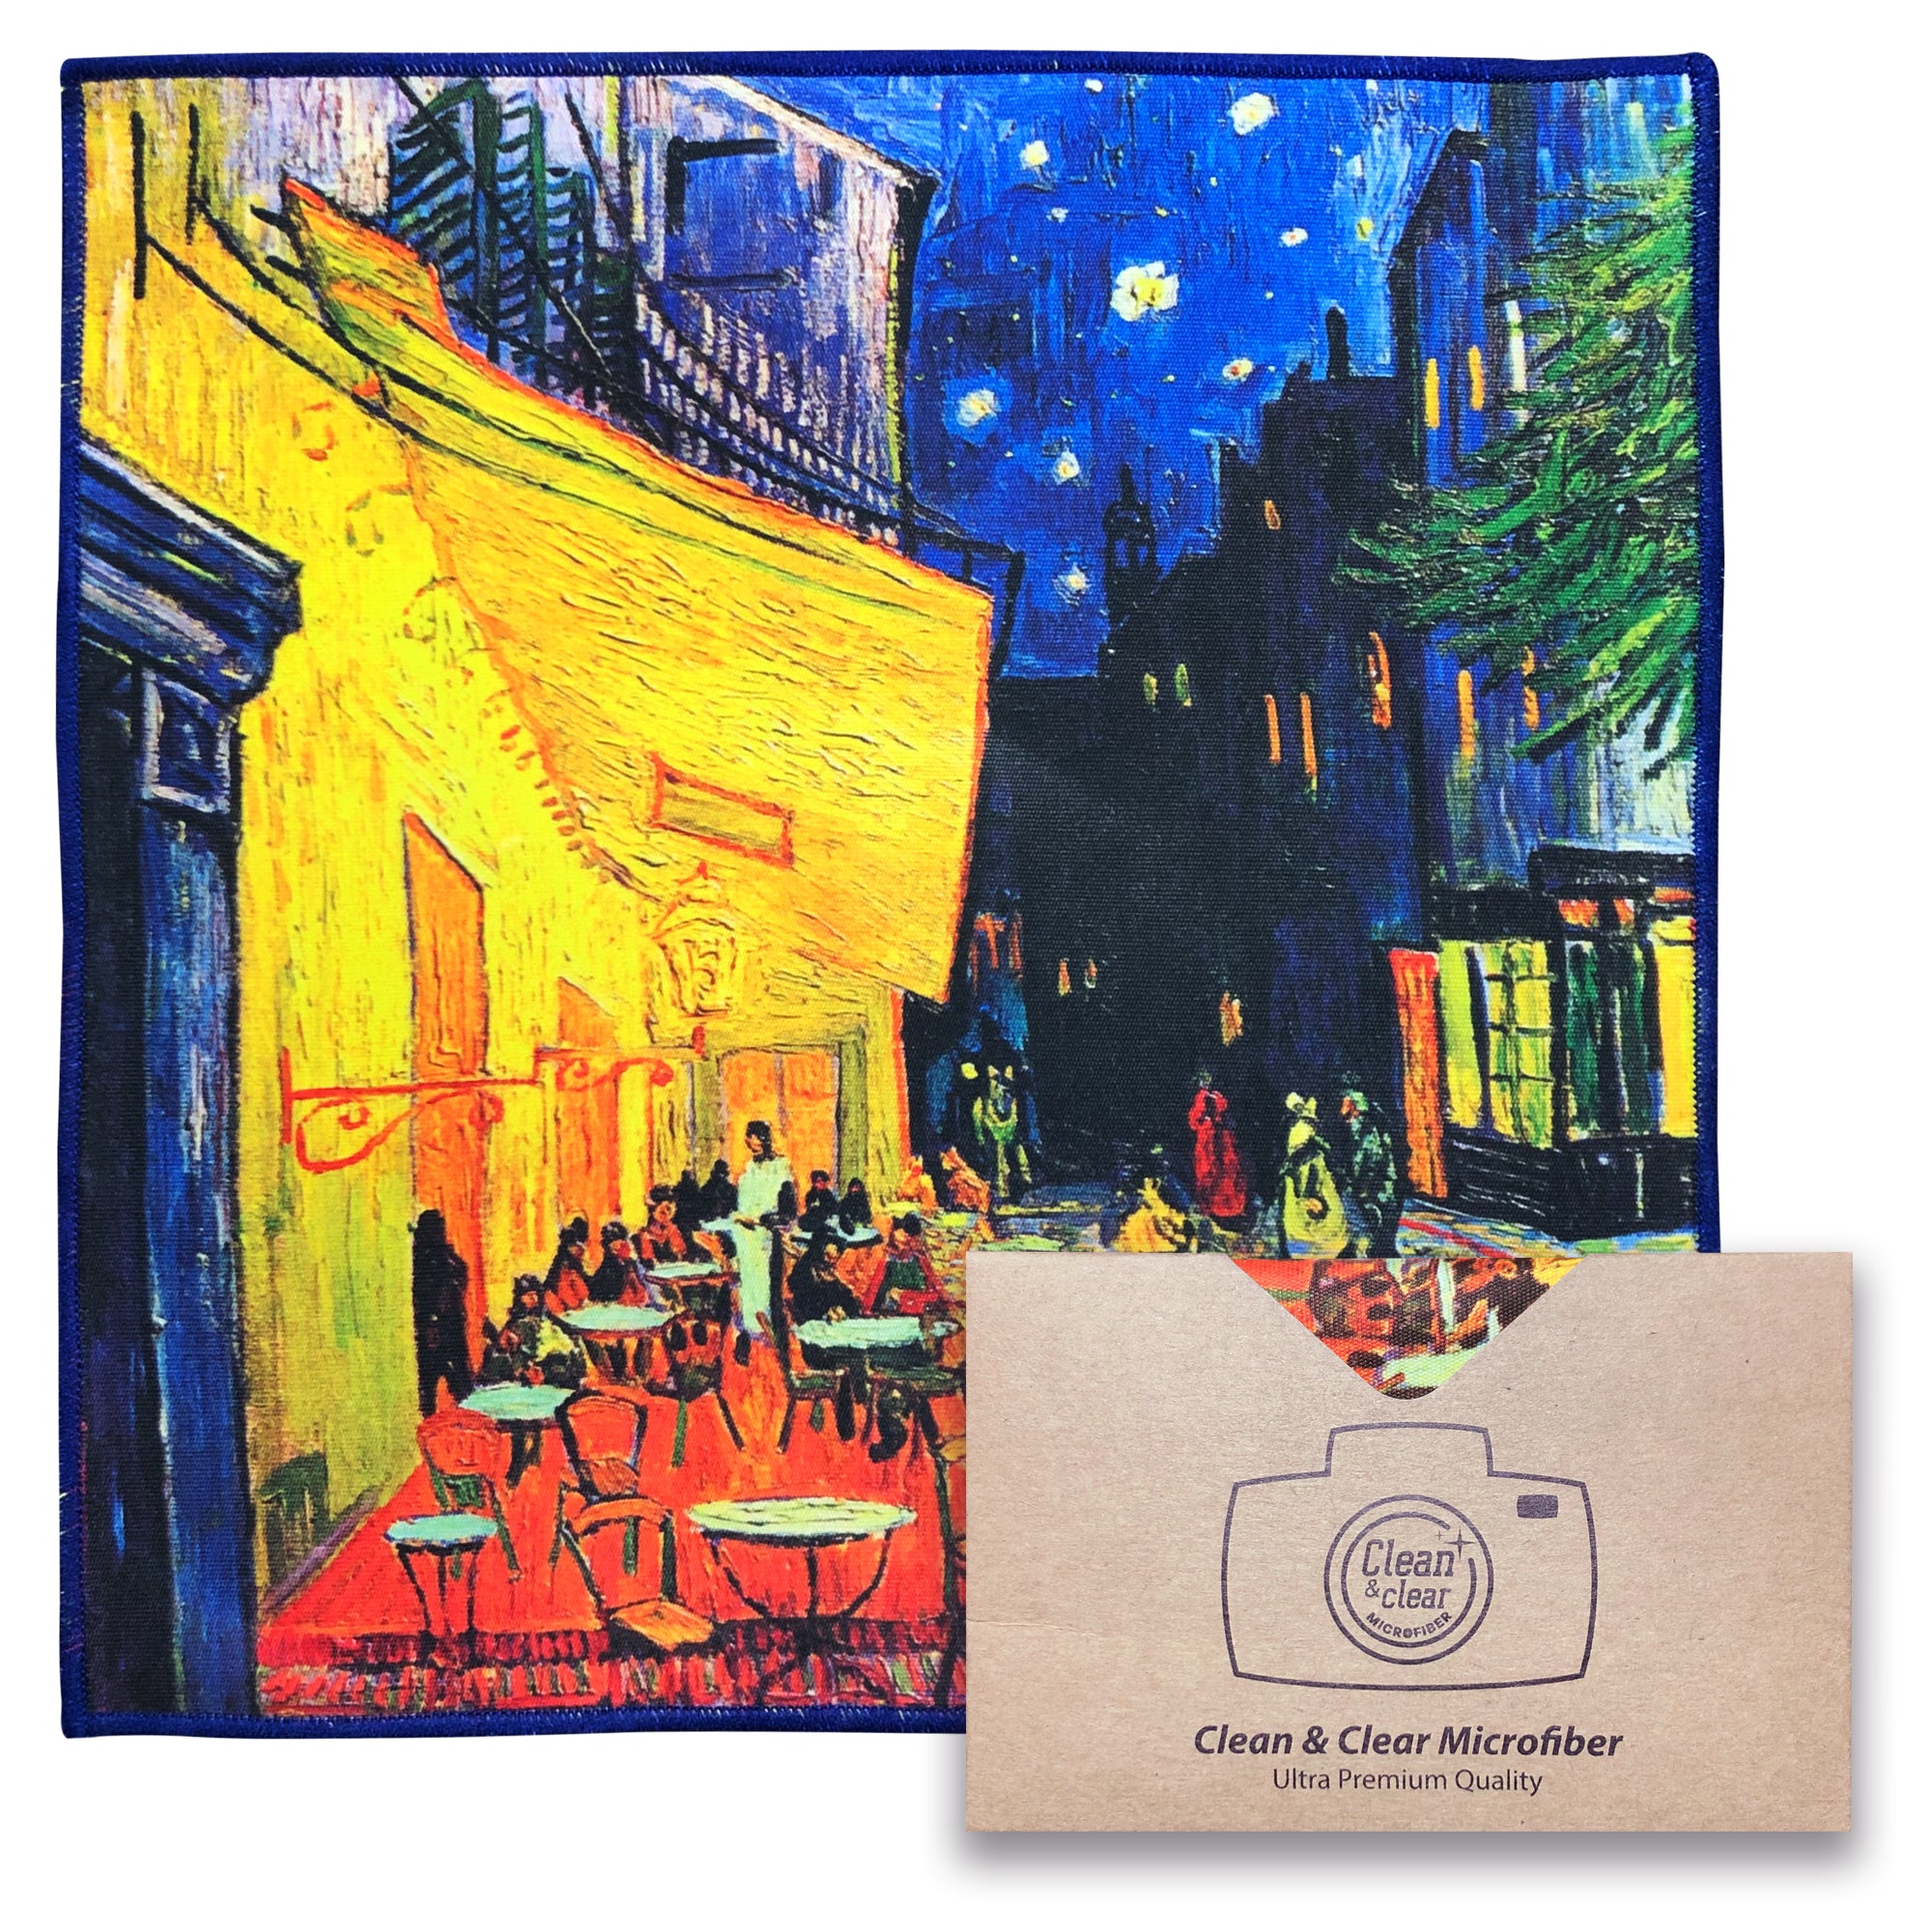 [6 Pack] Vincent Van Gogh "Café Terrace at Night" - Art Collection - Ultra Premium Quality Microfiber Cleaning Cloths